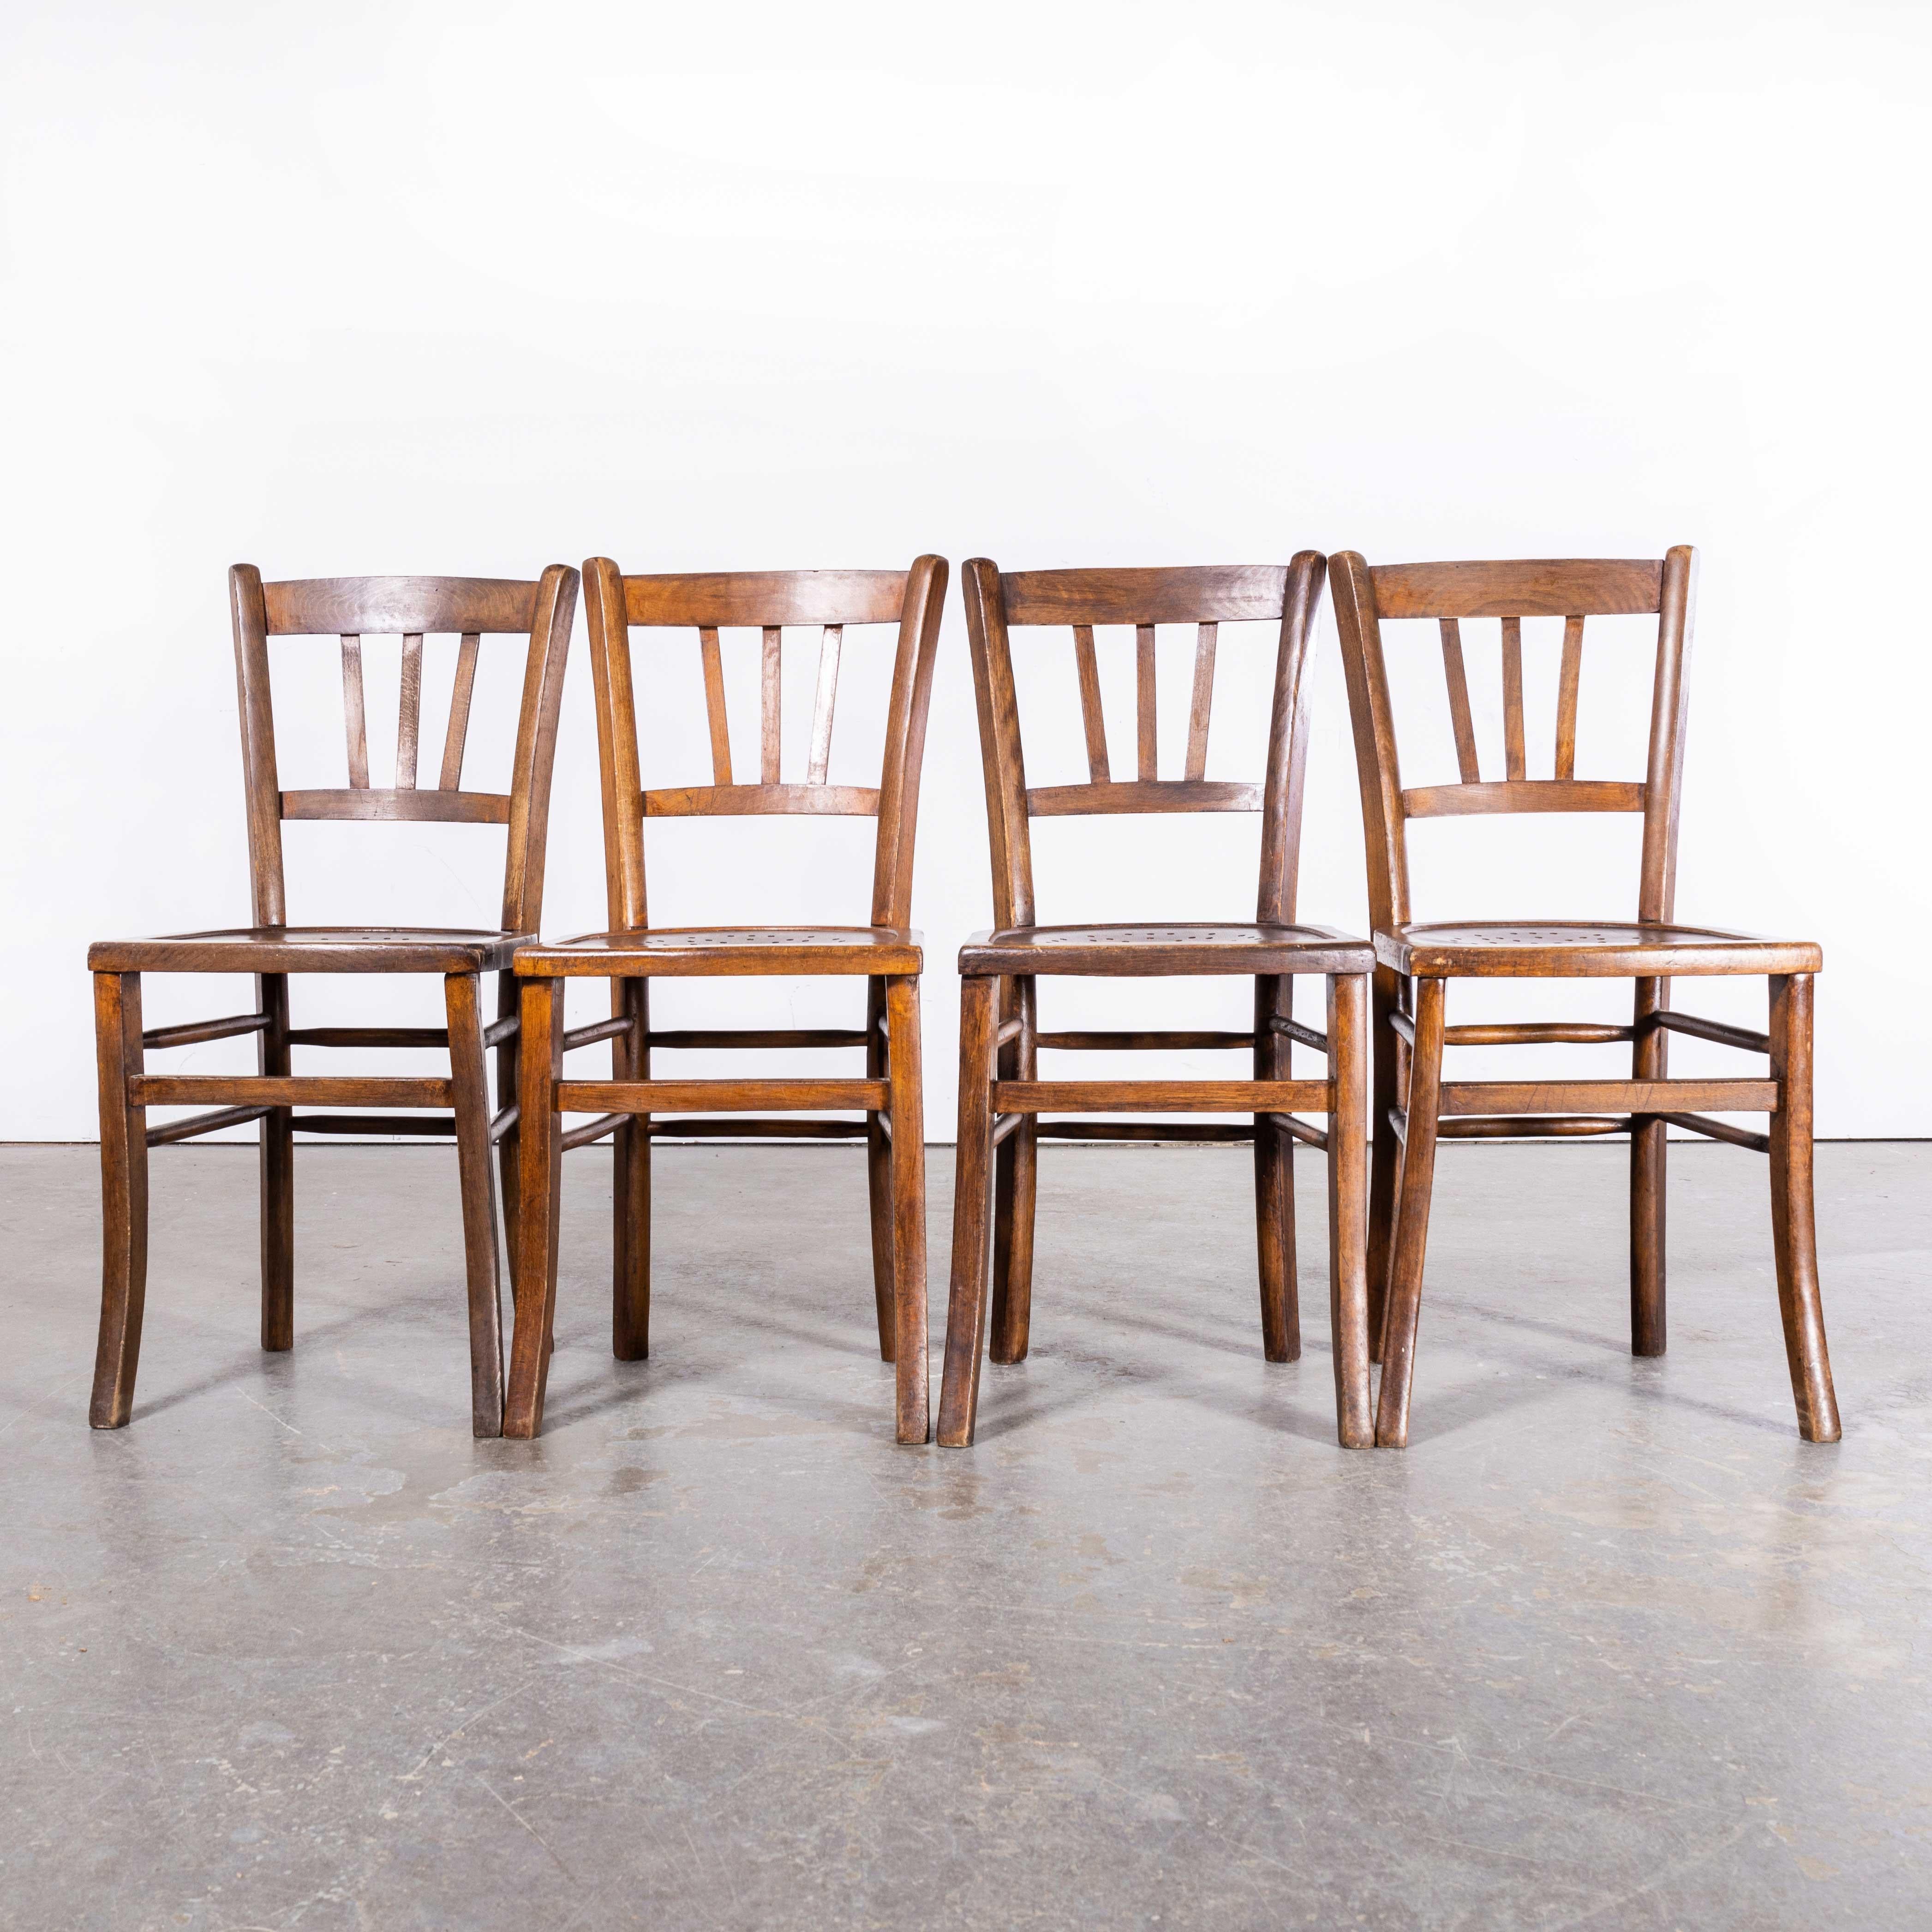 1940's Original French Farmhouse Chairs From Provence - Set Of Four 4